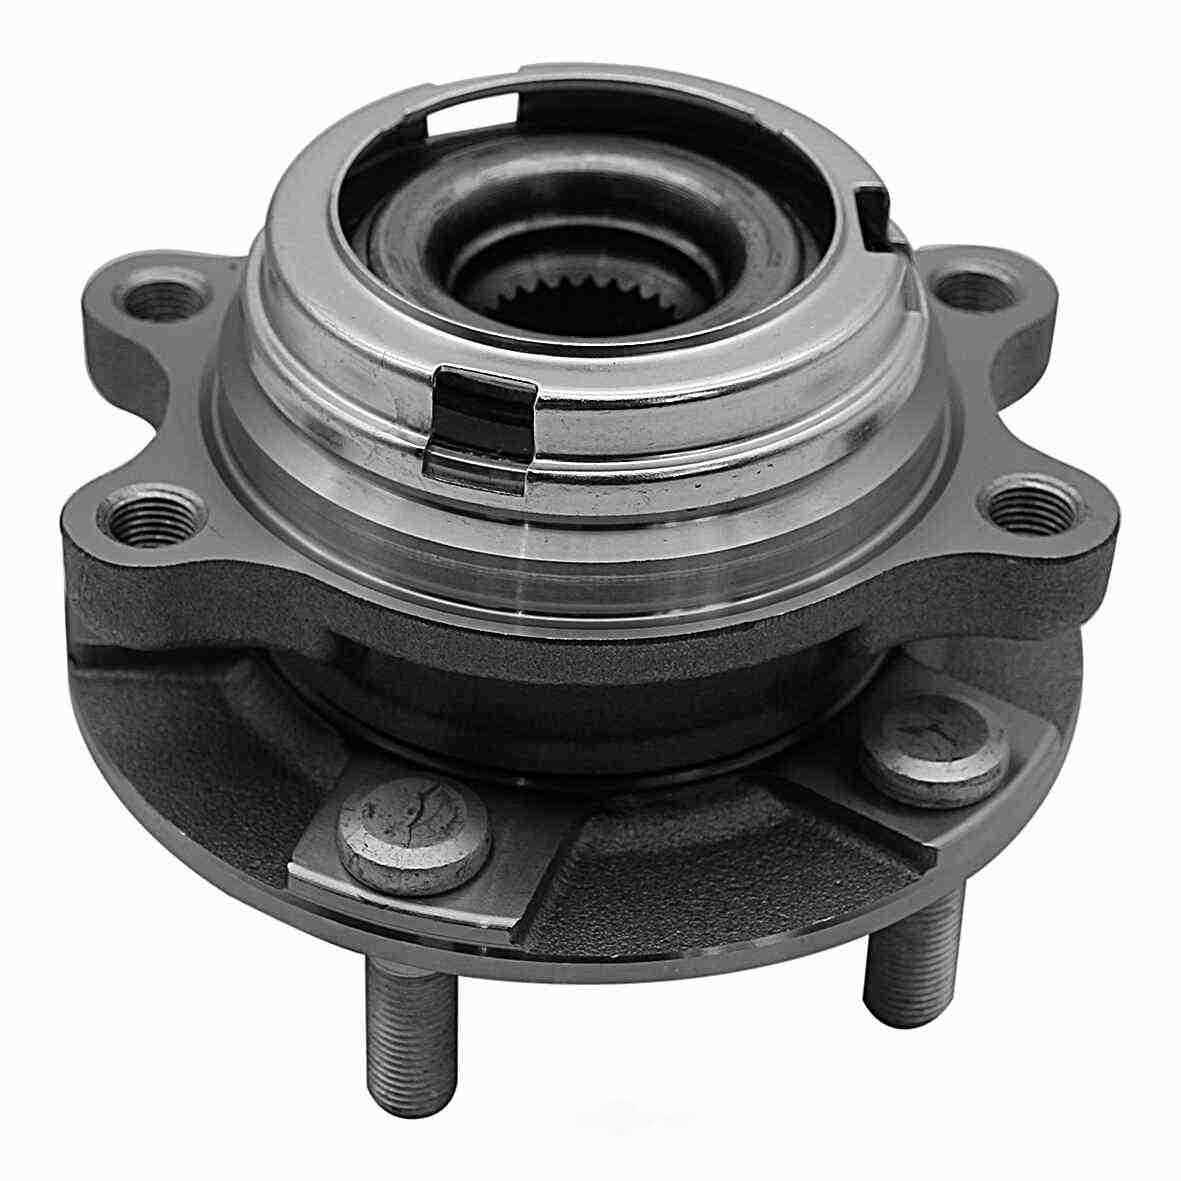 GSP NORTH AMERICA INC. - GSP New Wheel Bearing and Hub Assembly (Front) - AD8 394335